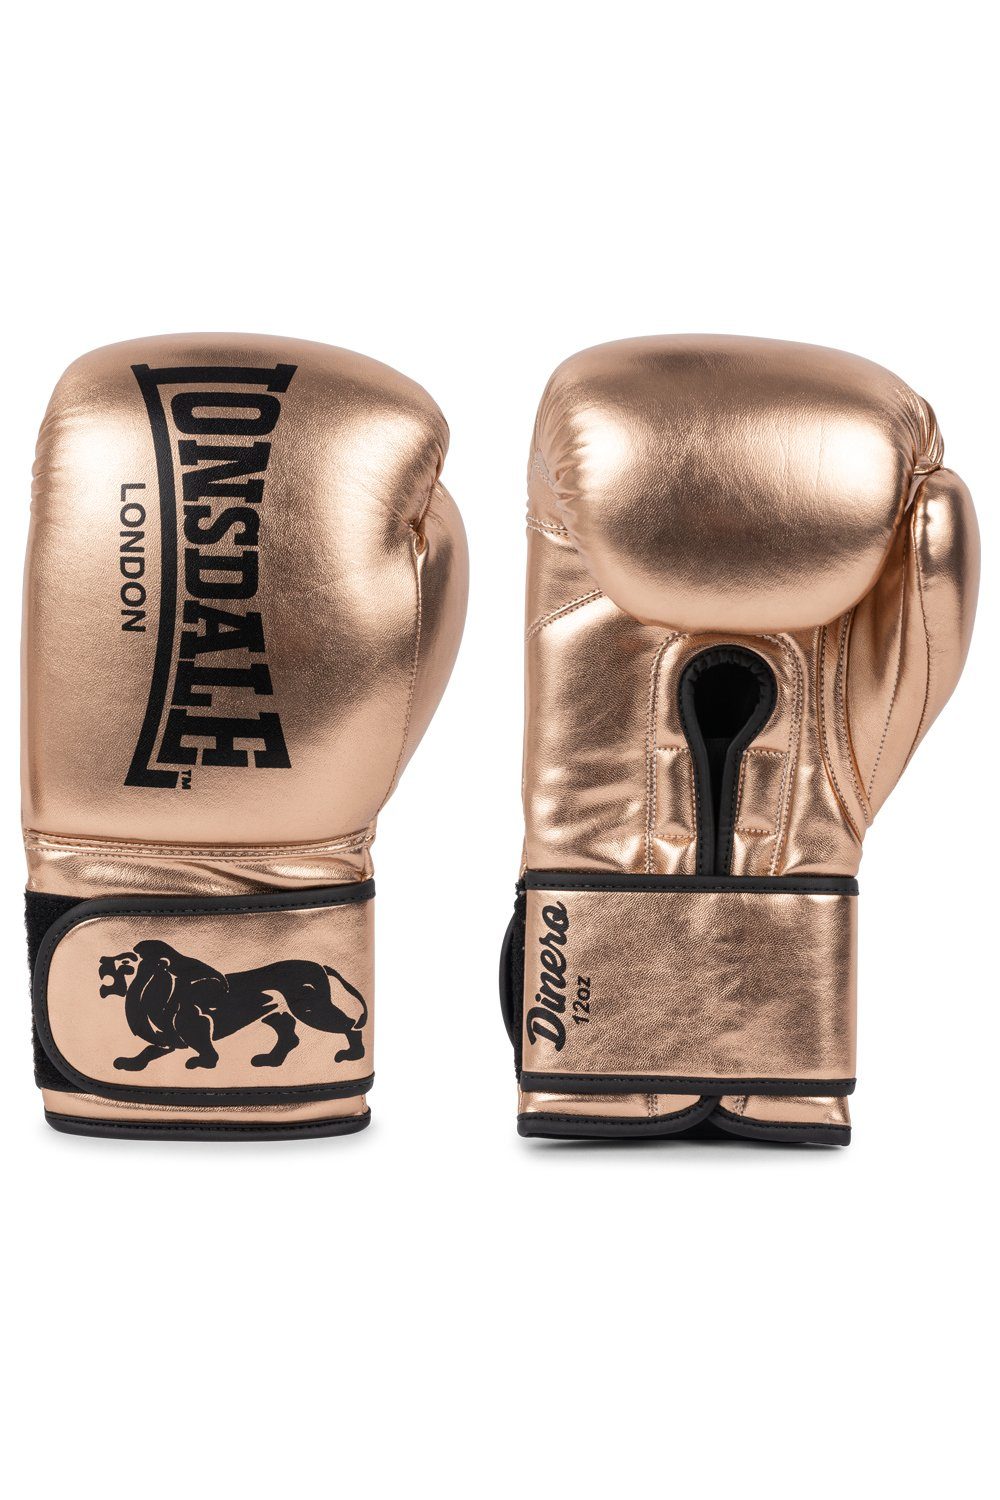 Boxhandschuhe Lonsdale DINERO